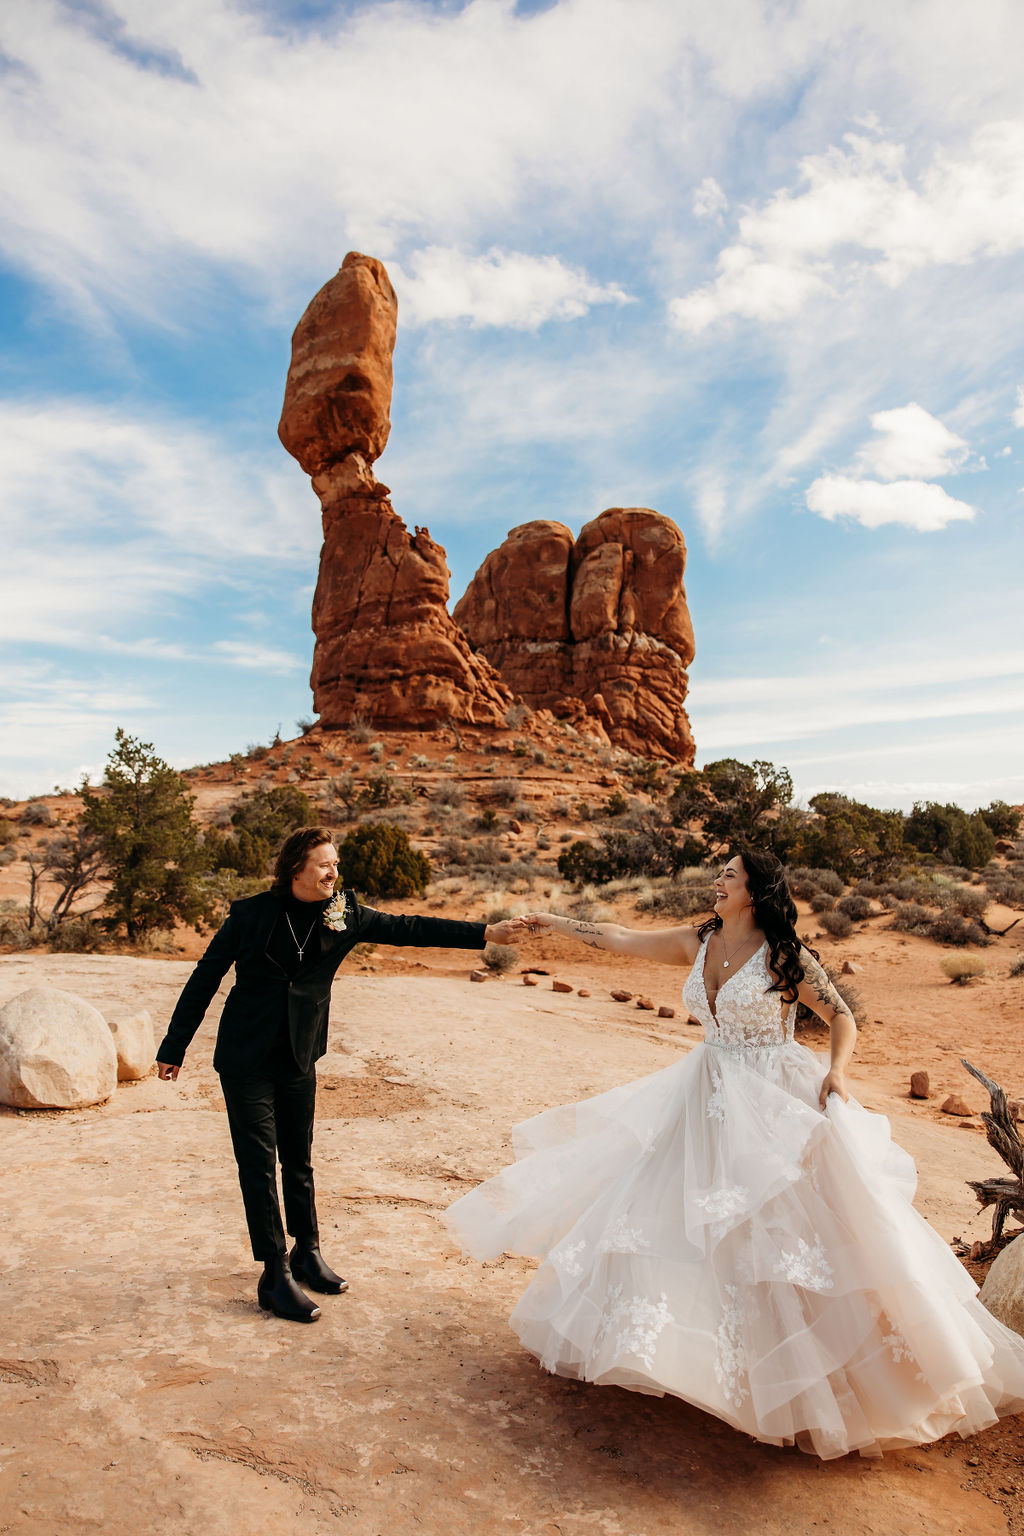 A couple holds hands while walking near a towering rock formation under a clear sky.